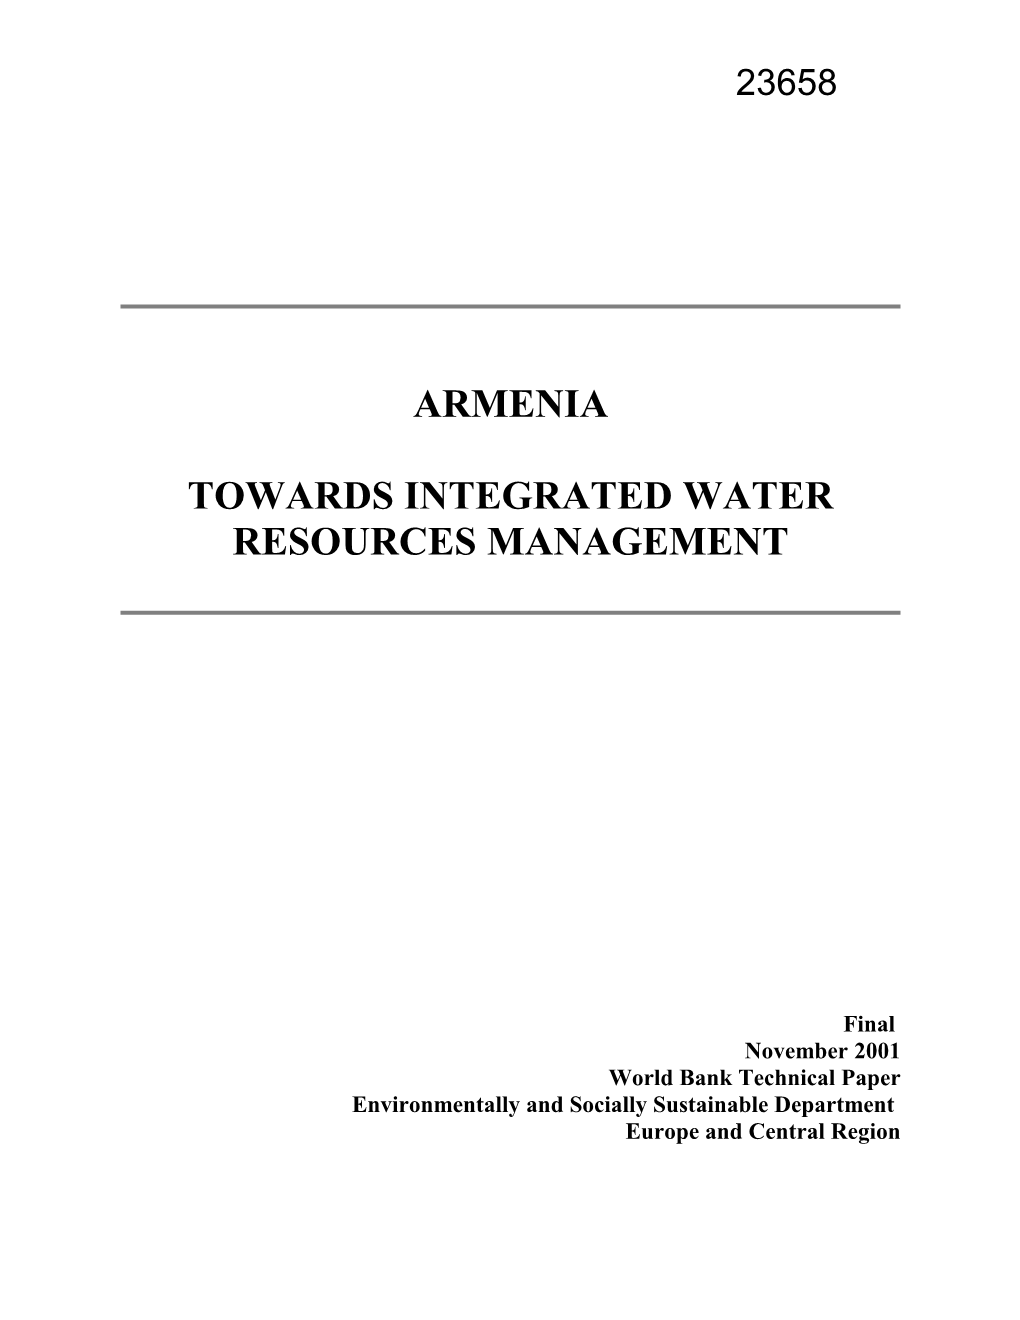 Towards Integrated Water Resources Management